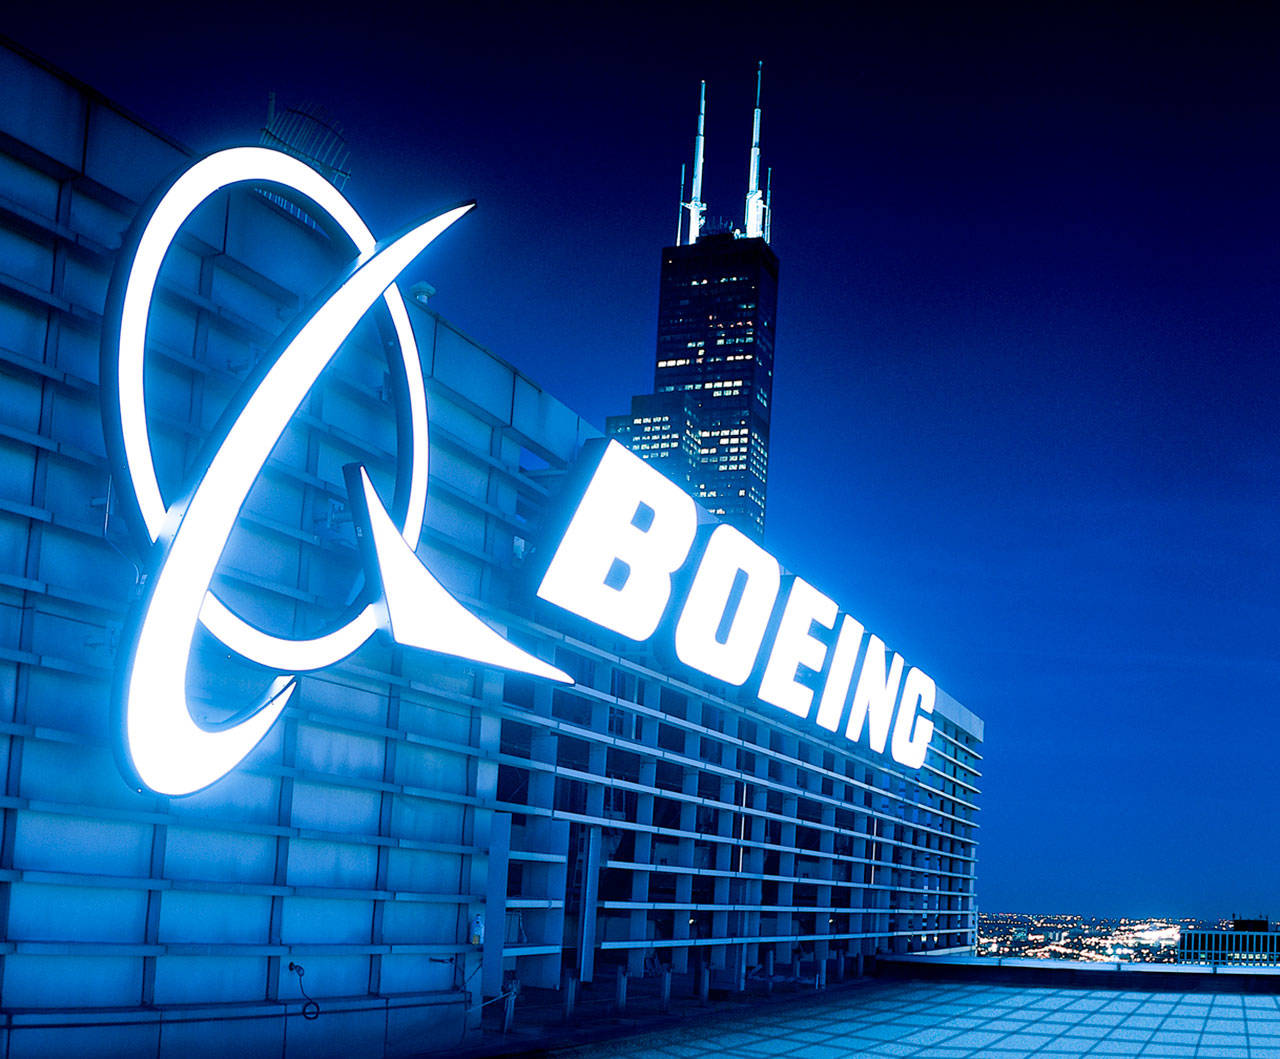 Boeing to sell about 50 acres at Kent site